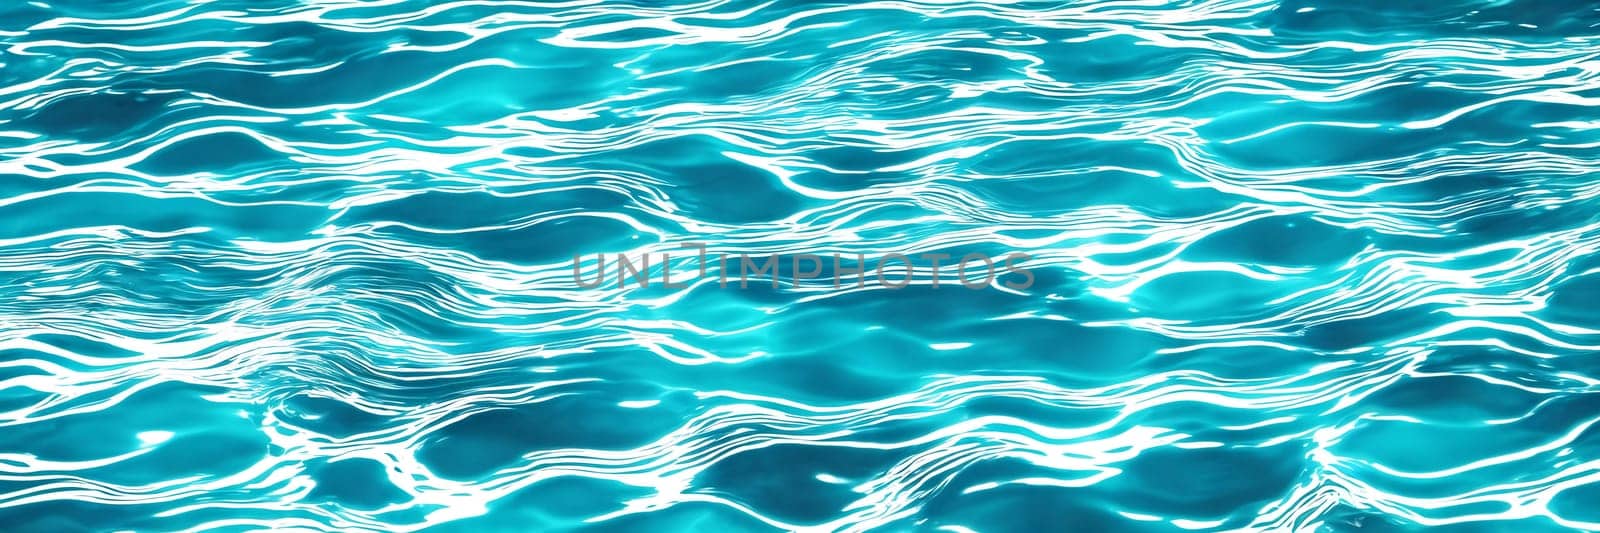 Abstract Water Ripples. Water surfaces with gentle ripples. by GoodOlga